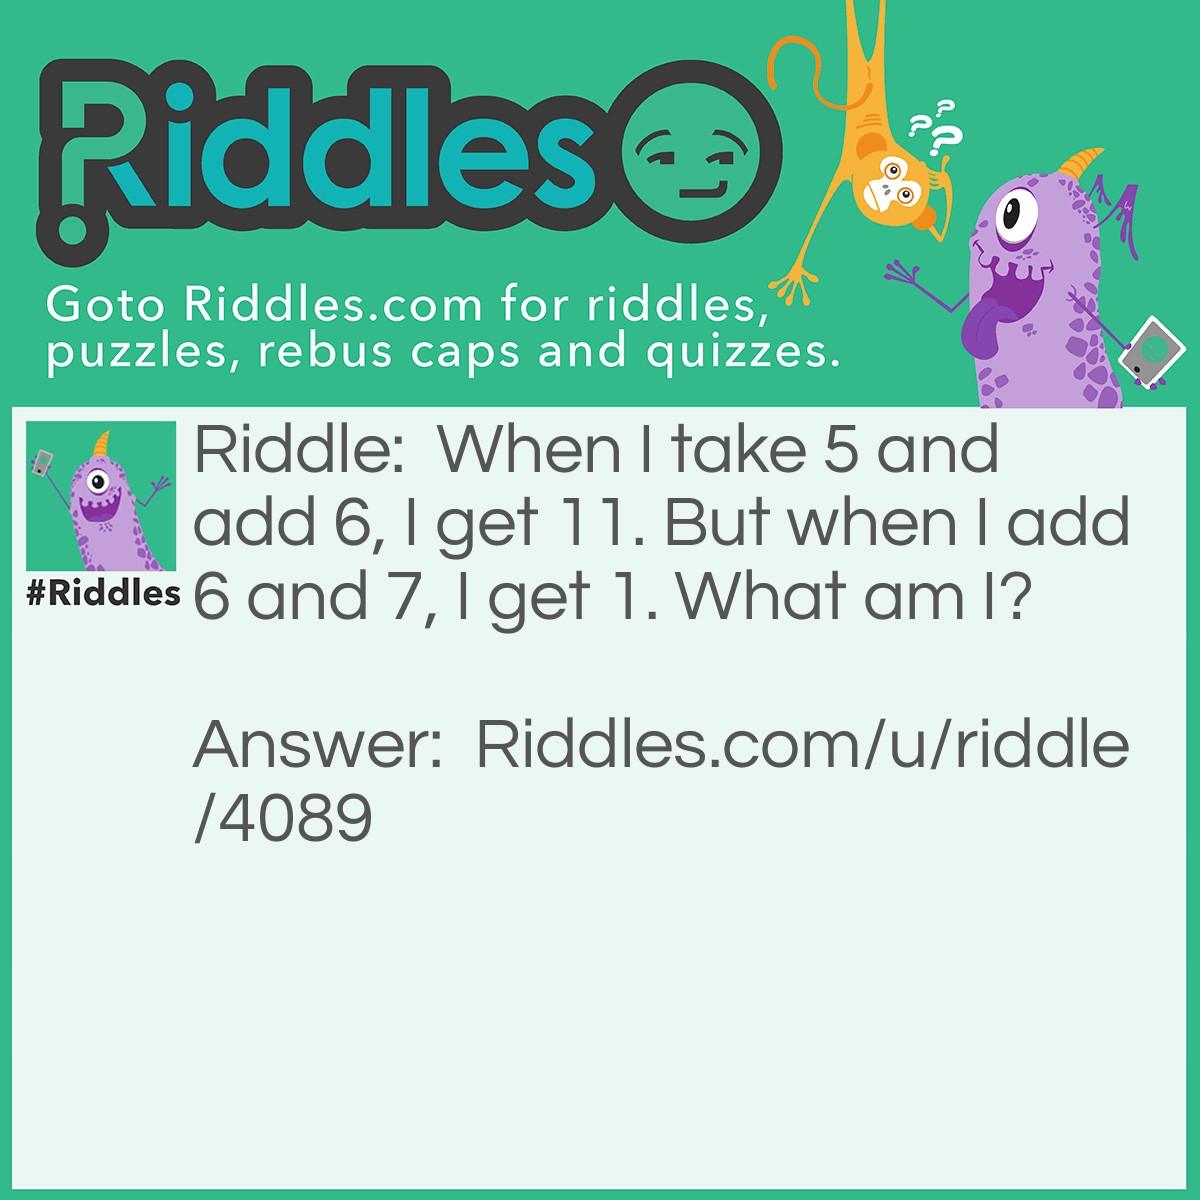 Riddle: When I take 5 and add 6, I get 11. But when I add 6 and 7, I get 1. What am I? Answer: A clock.